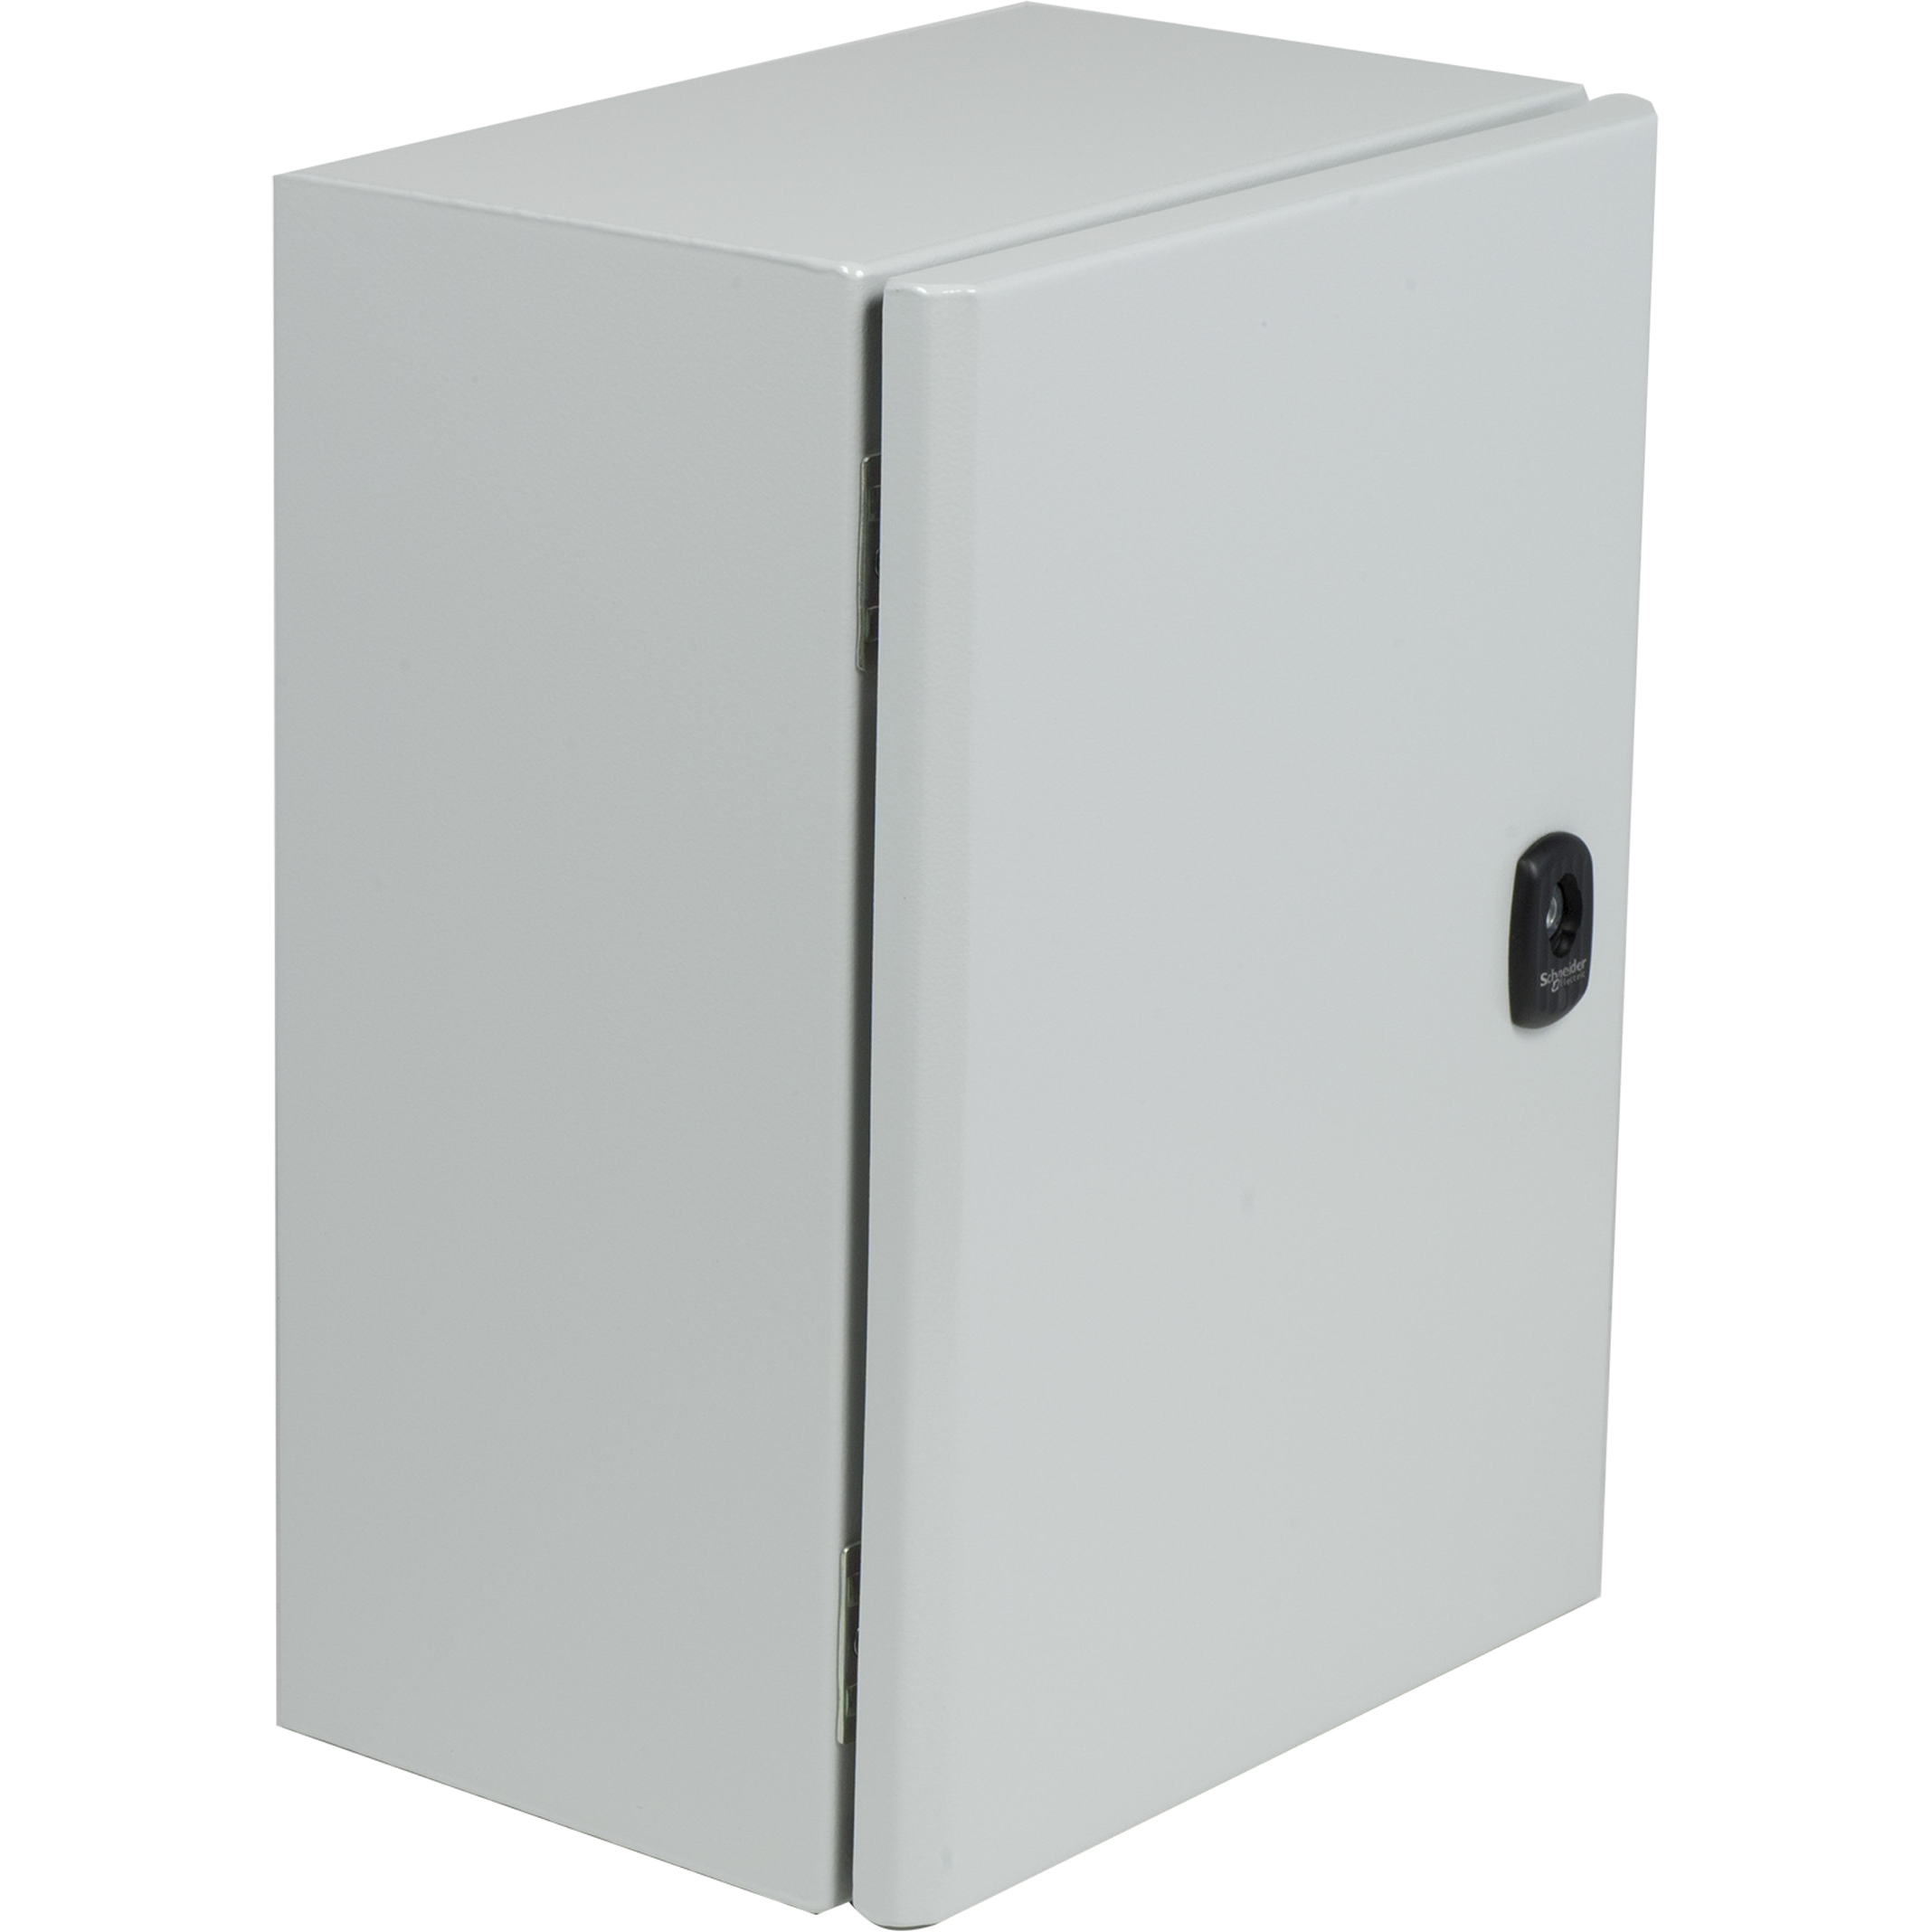 Wall mounted steel enclosure, Spacial S3DC, plain door, without plain chasis, 500x500x250mm, IP66, IK10